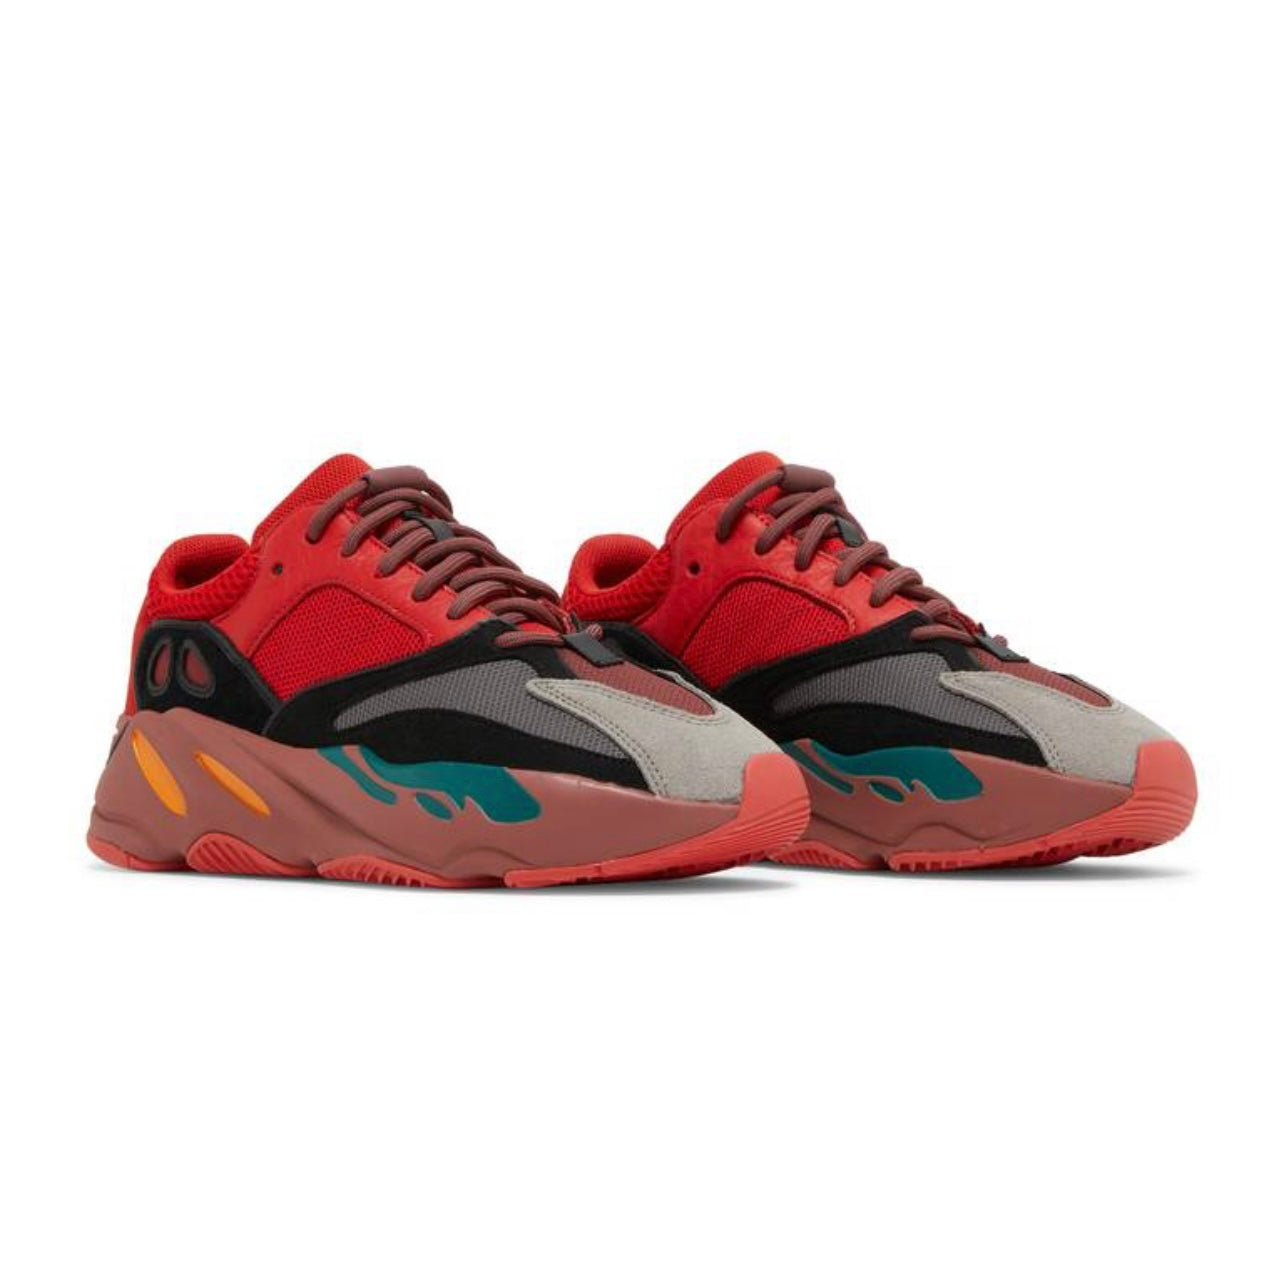 Size 11 - Adidas Yeezy Boost 700 "Hi-Res Red"